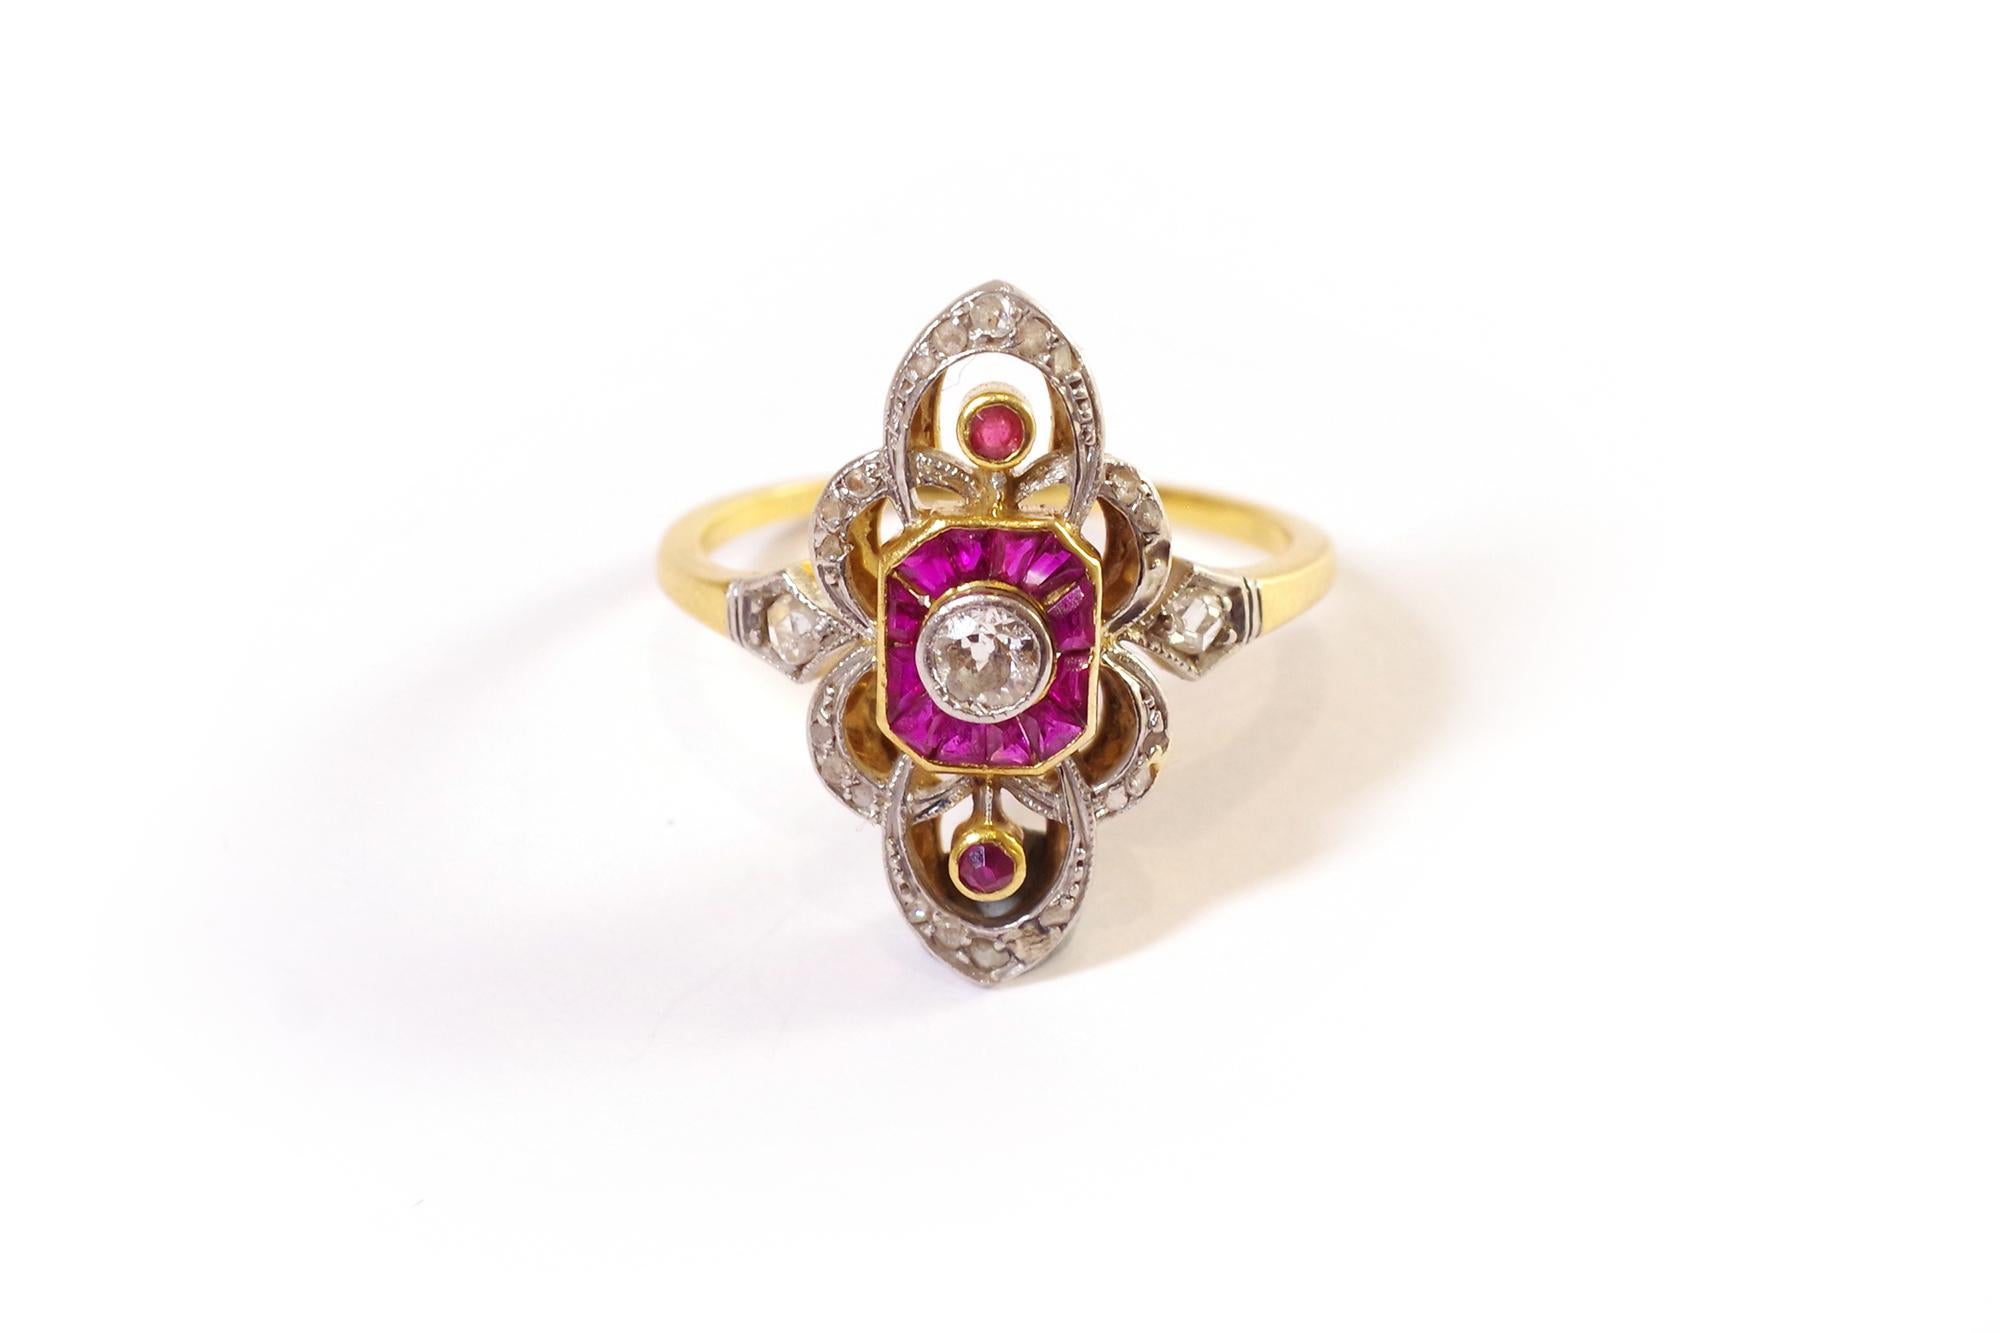 Belle Époque Belle Epoque Ruby Diamond Ring in Yellow Gold and Platinum, Wedding Ring For Sale